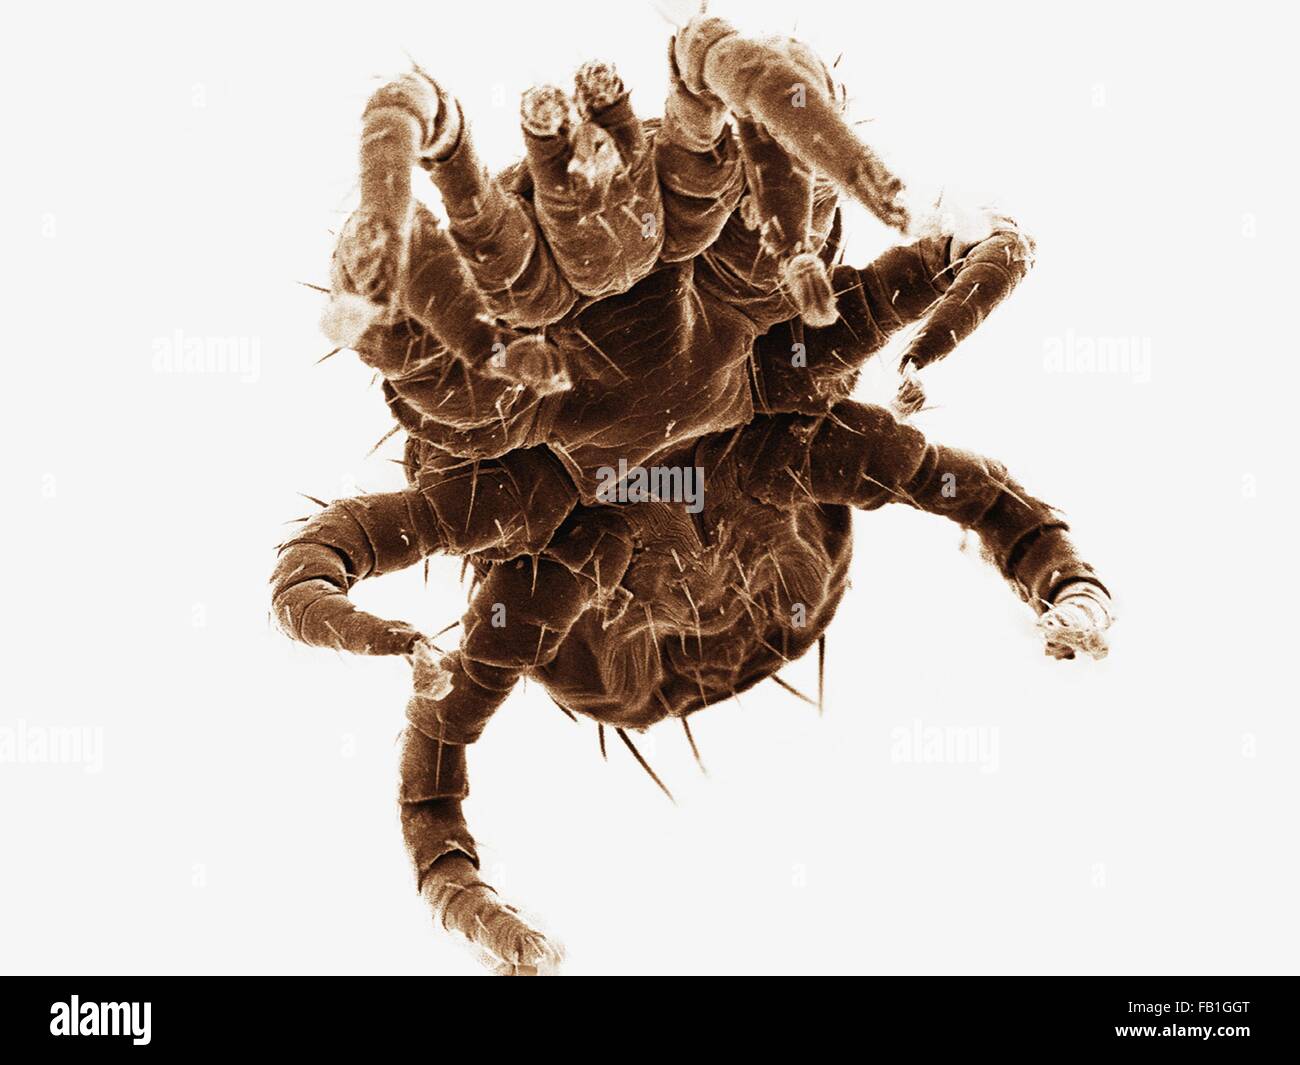 Coloured SEM of ectoparasitic mite collected from bat Stock Photo